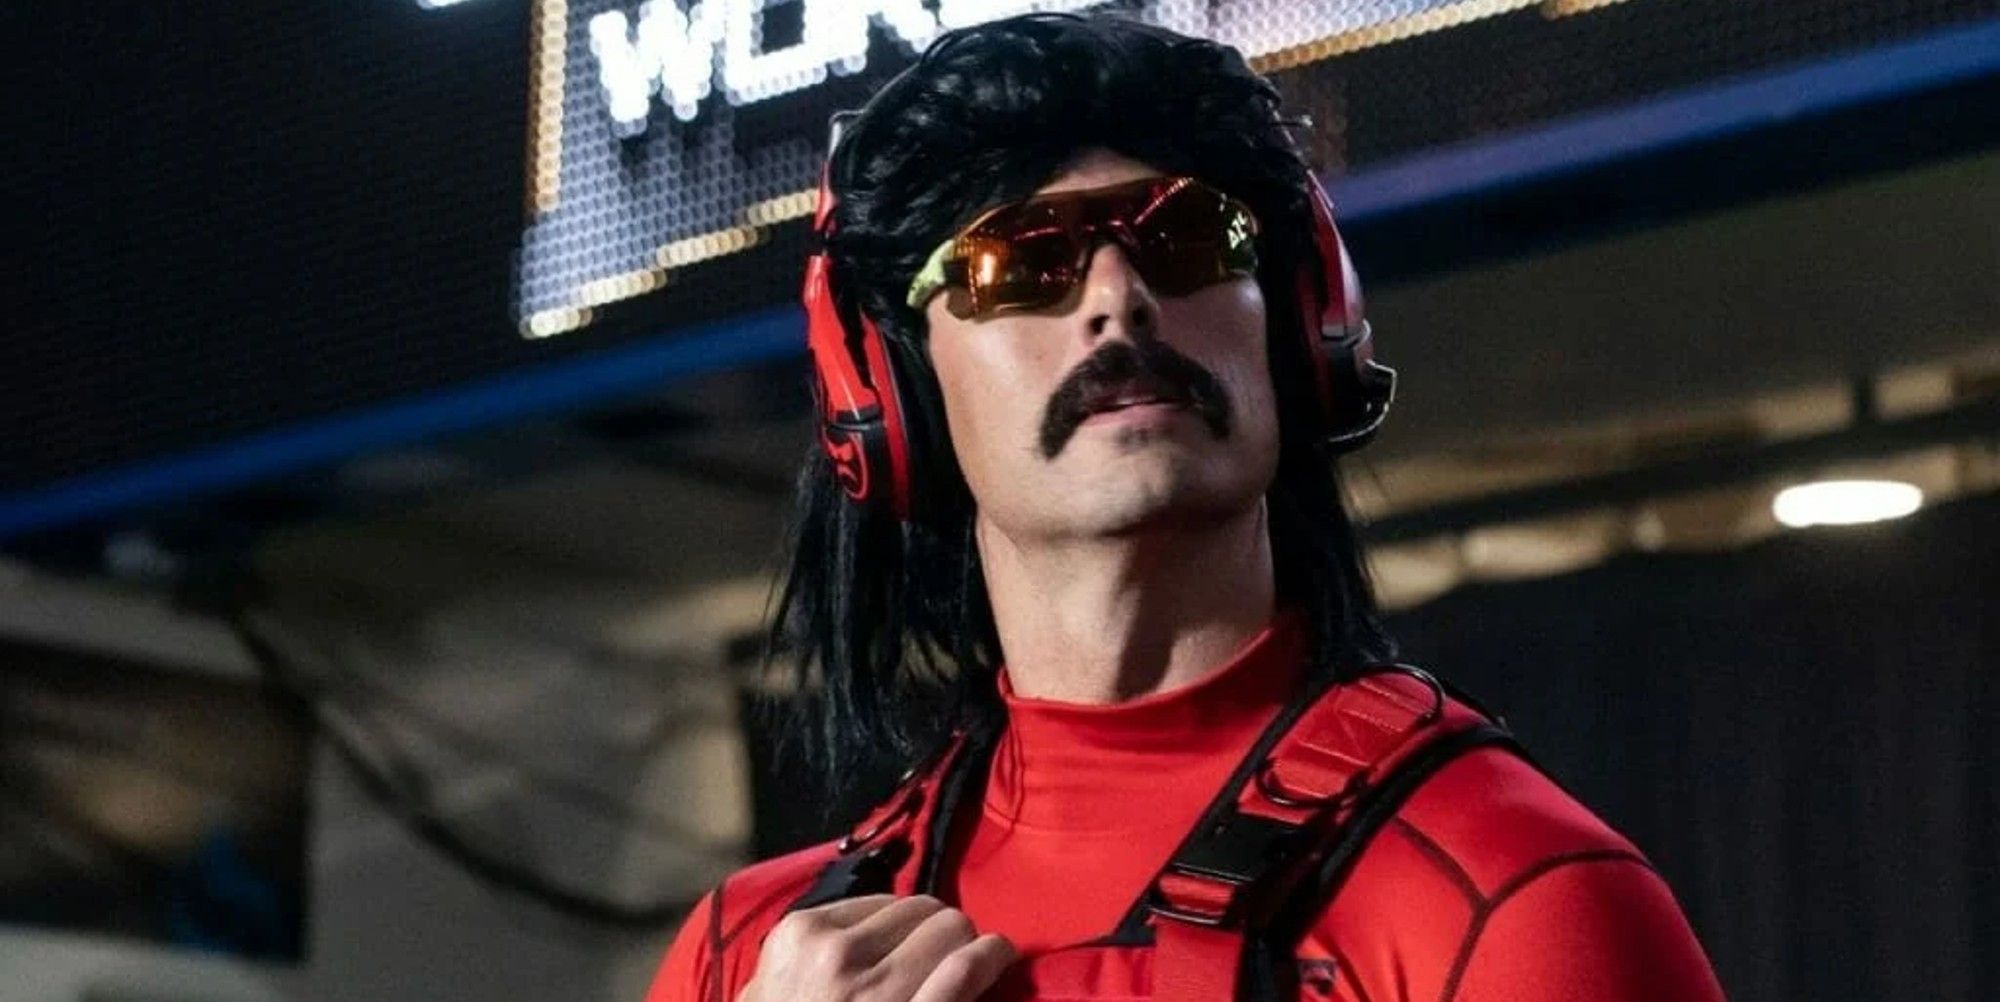 Hikaru banned from Twitch for showing clips of Dr Disrespect 